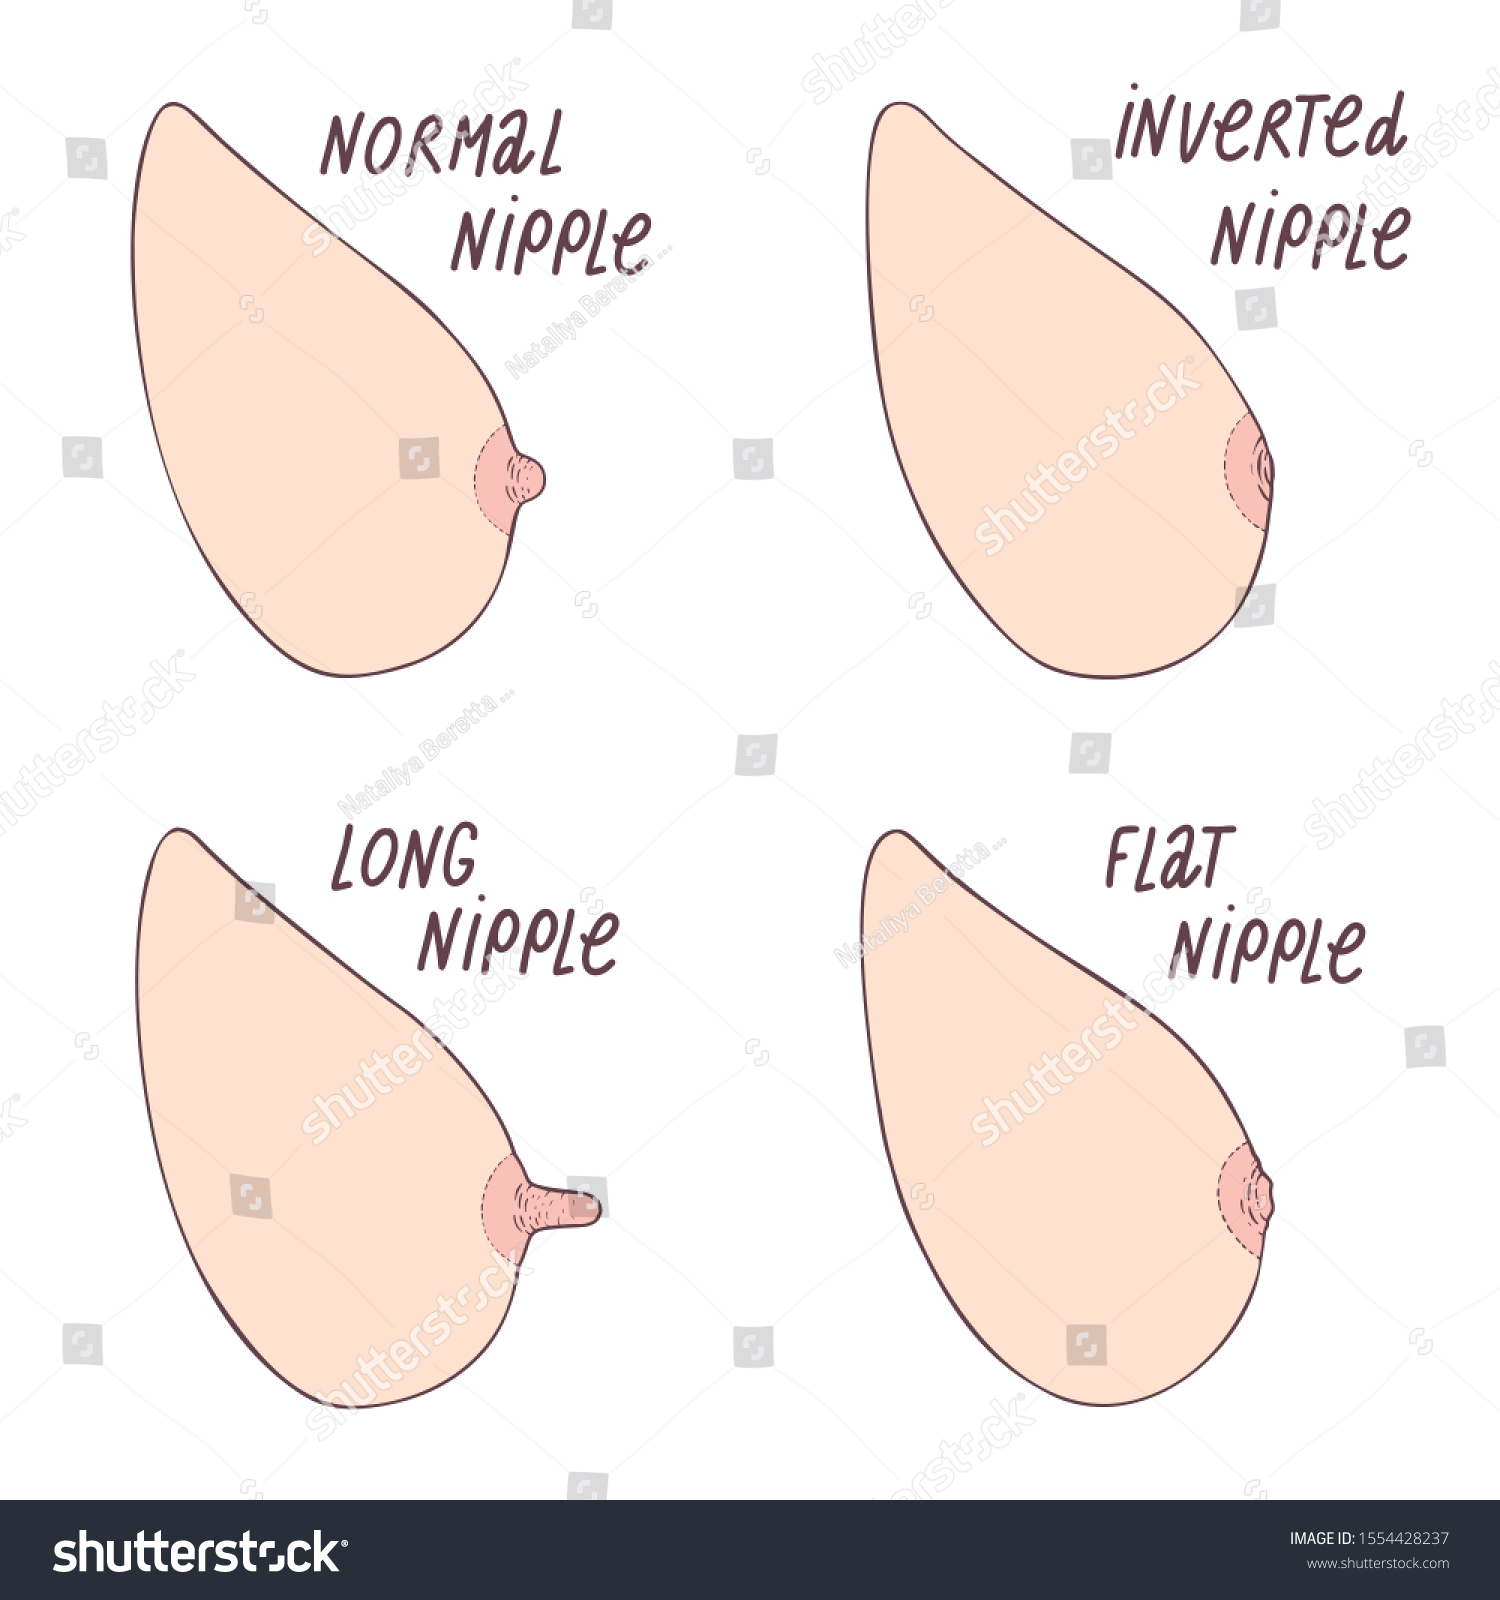 Nipples of different types The 8